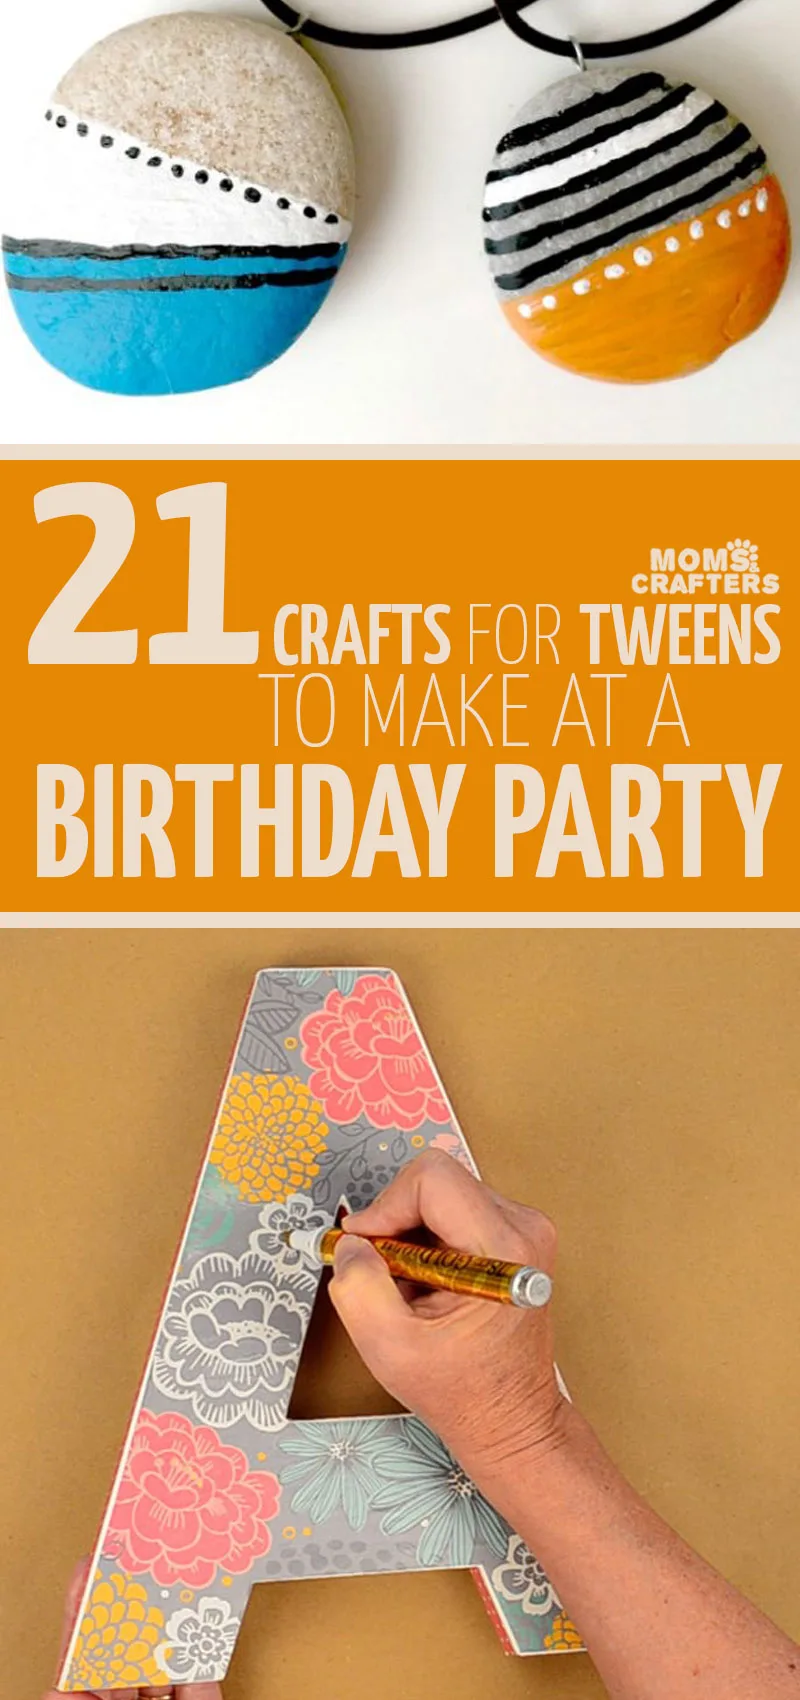 Click for a fun list of birthday party crafts for tweens and teens - these fun ideas are perfect for tween craft workshops for boys or girls.